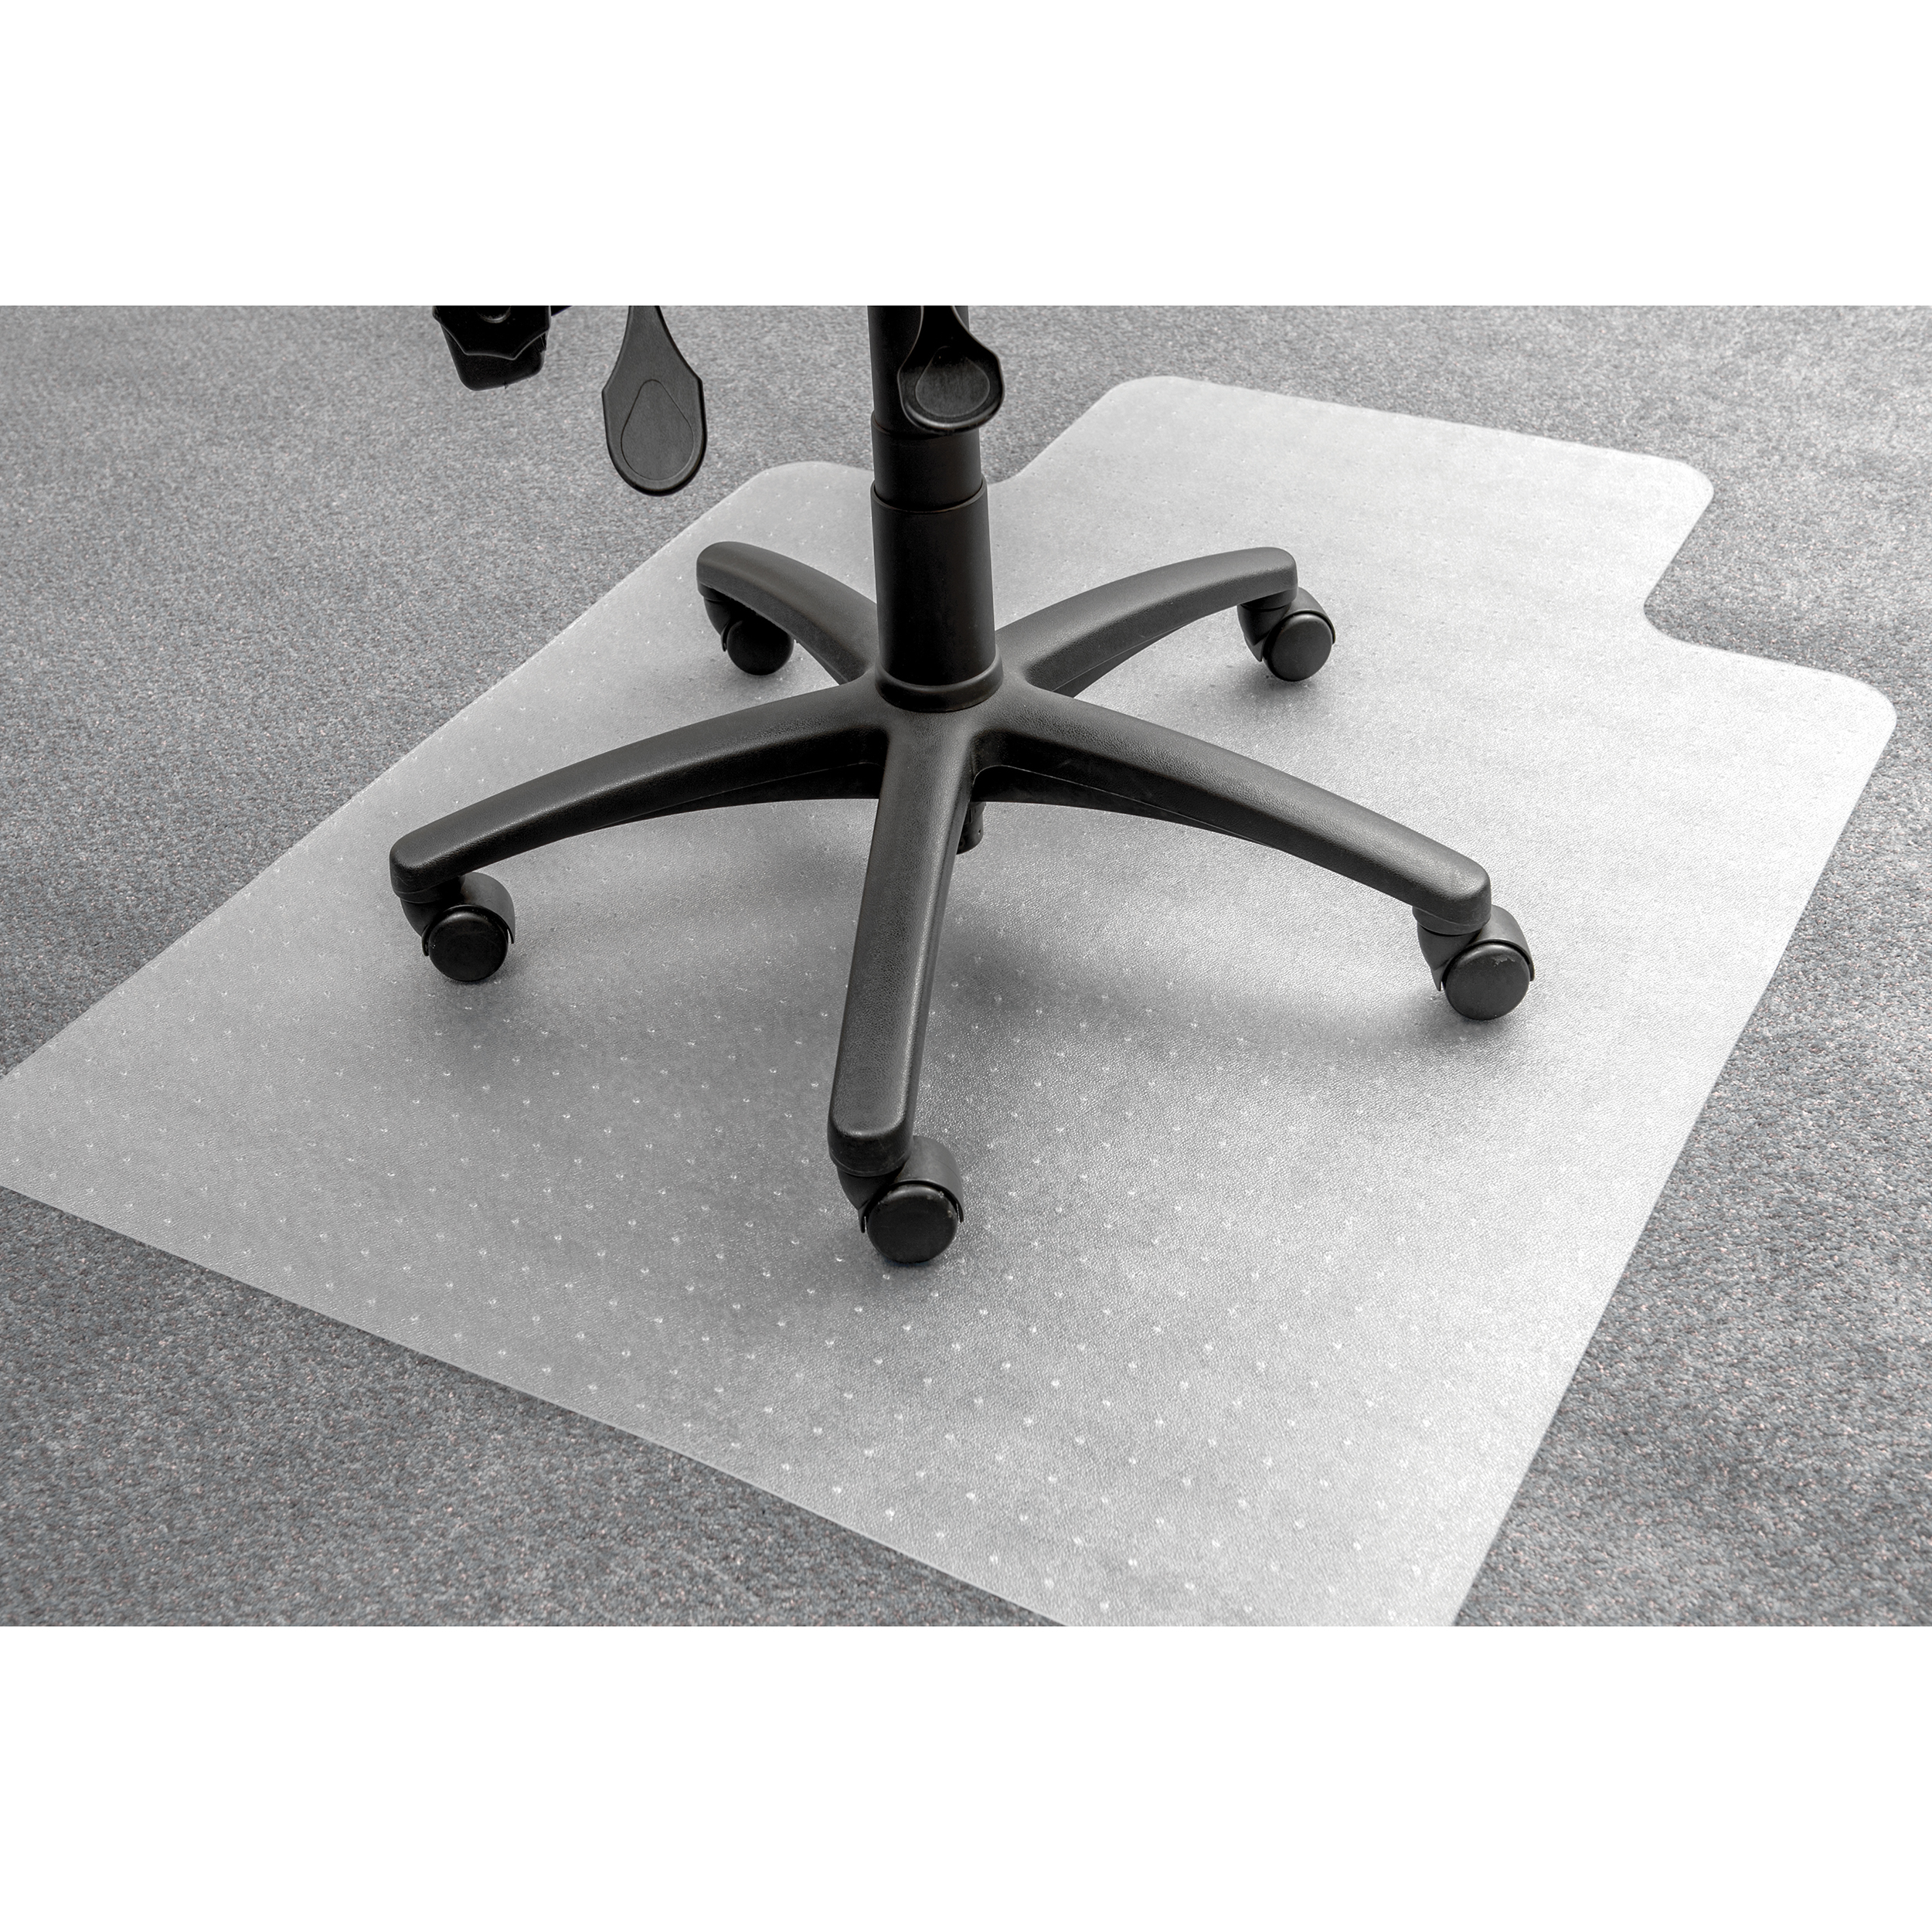 5 Star Office Chair Mat For Carpets Pvc Lipped 900x1200mm Clear